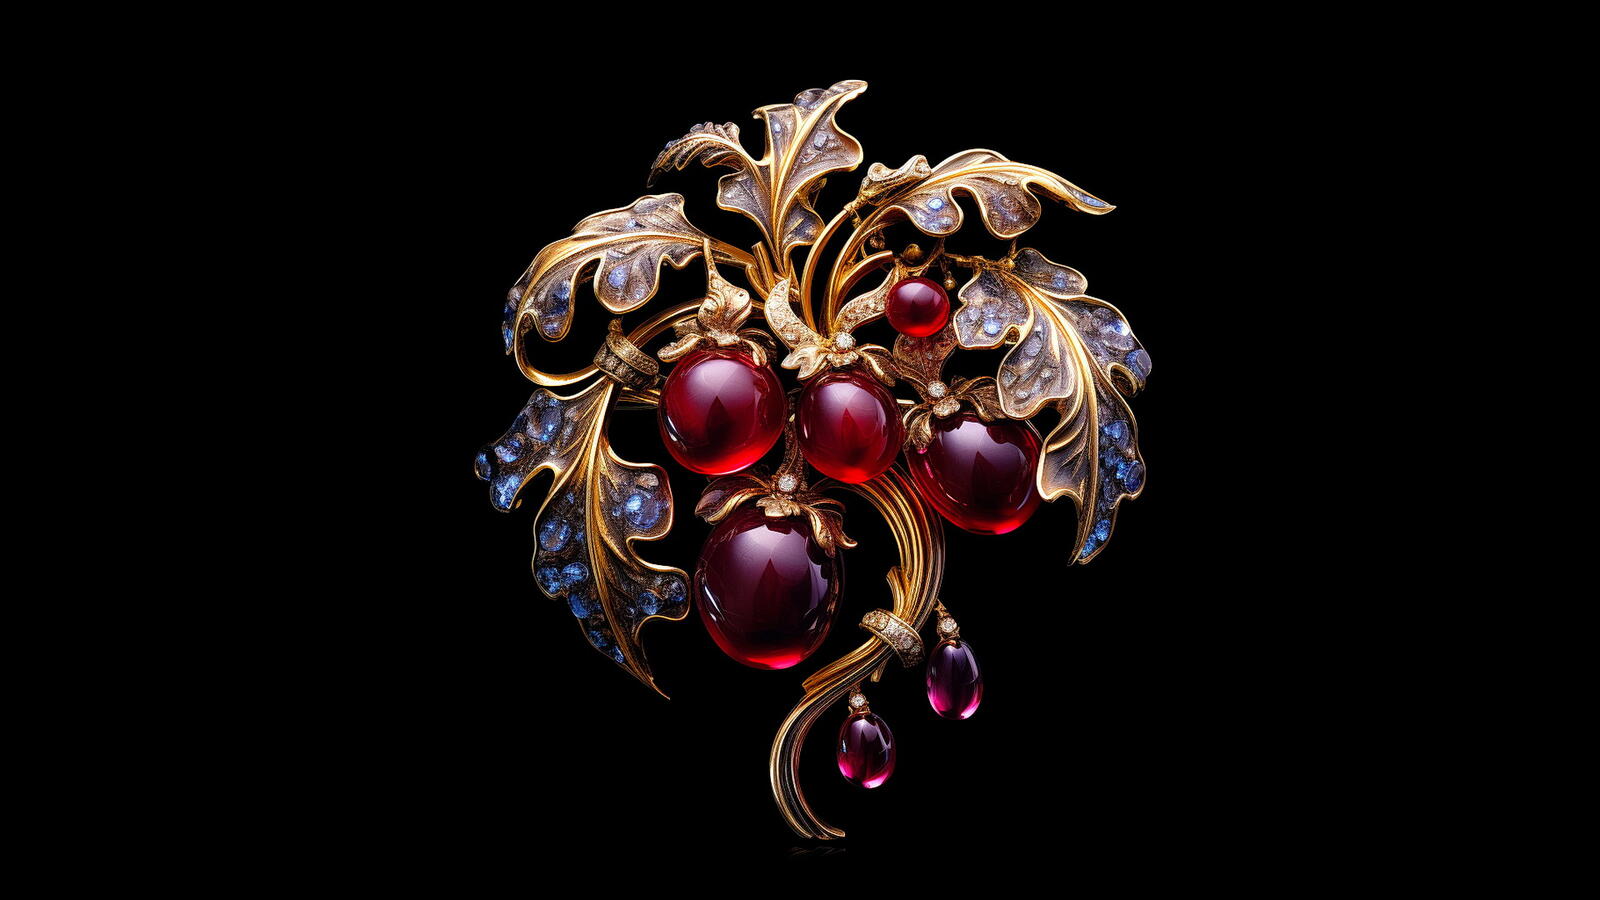 Free photo A beautiful brooch on a black background